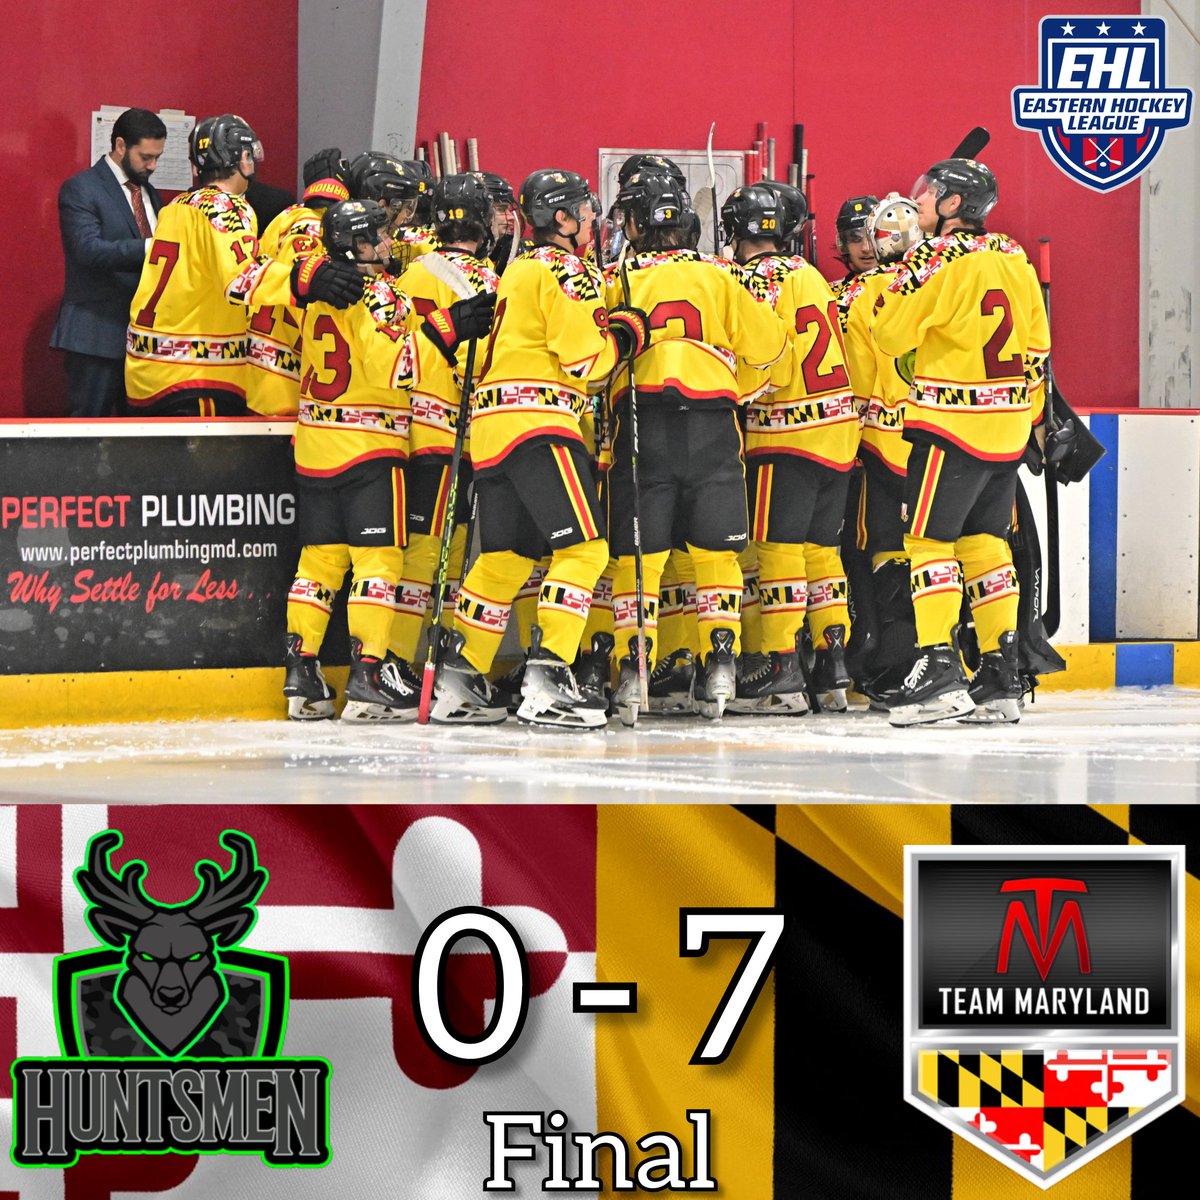 Final from Piney. 7 different players scored this afternoon as your Team Maryland rolled to a 7-0 victory over the Pennsylvania Huntsmen!!!

#RollTM #MarylandPride #EHL